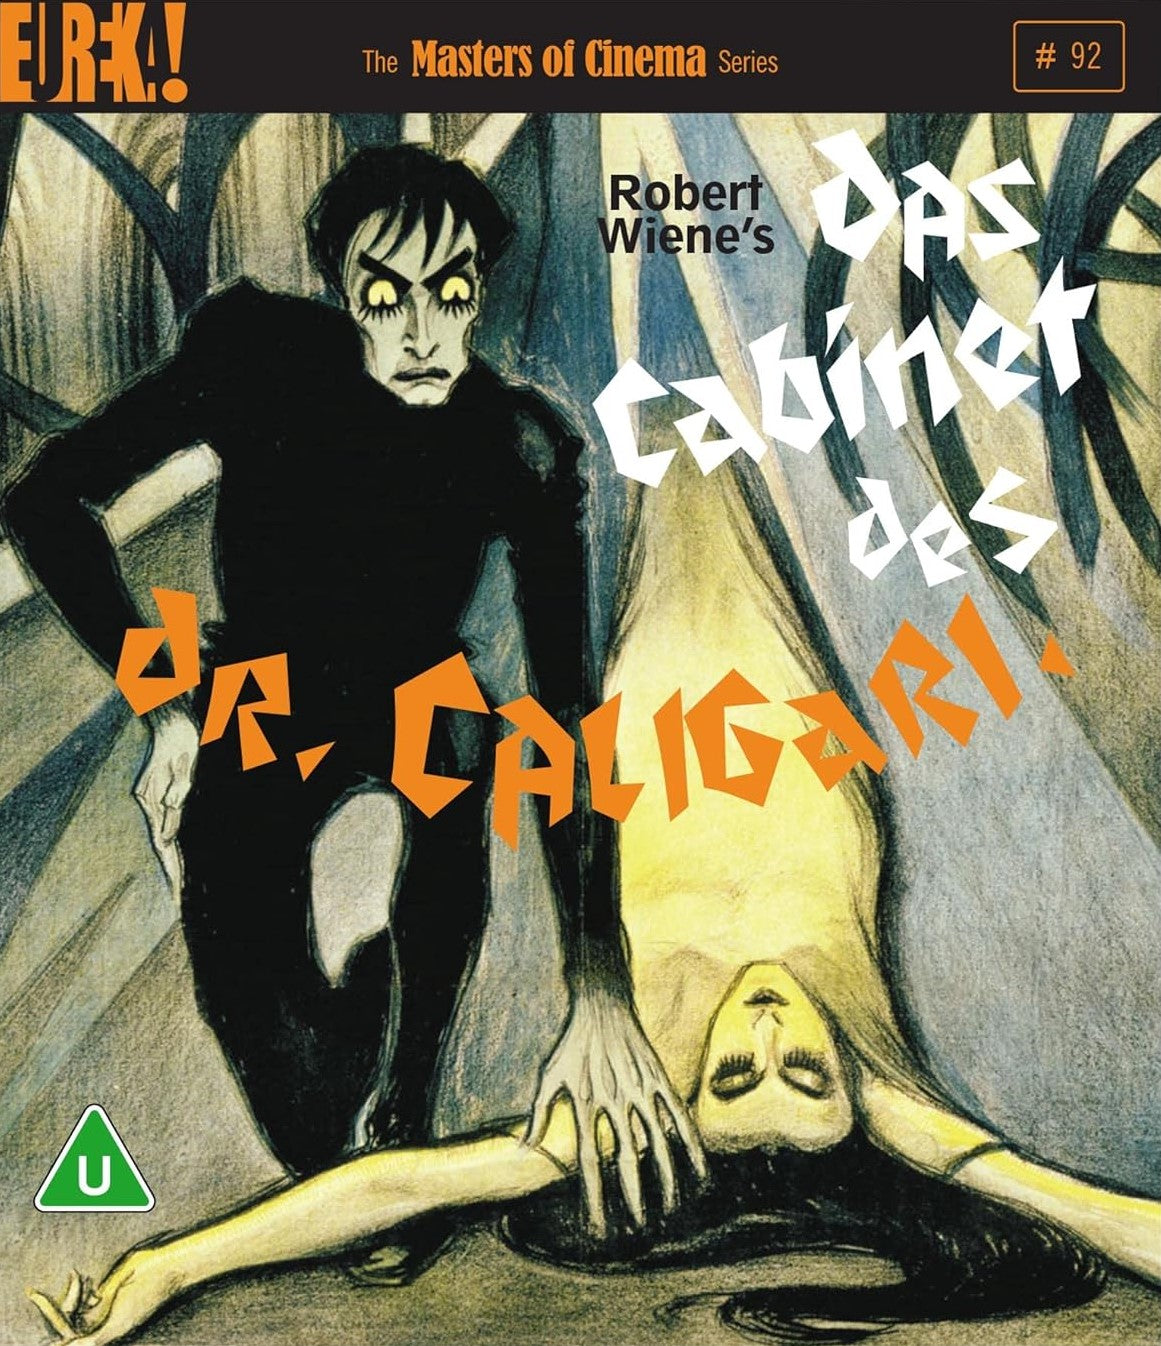 THE CABINET OF DR CALIGARI (REGION FREE IMPORT) 4K UHD